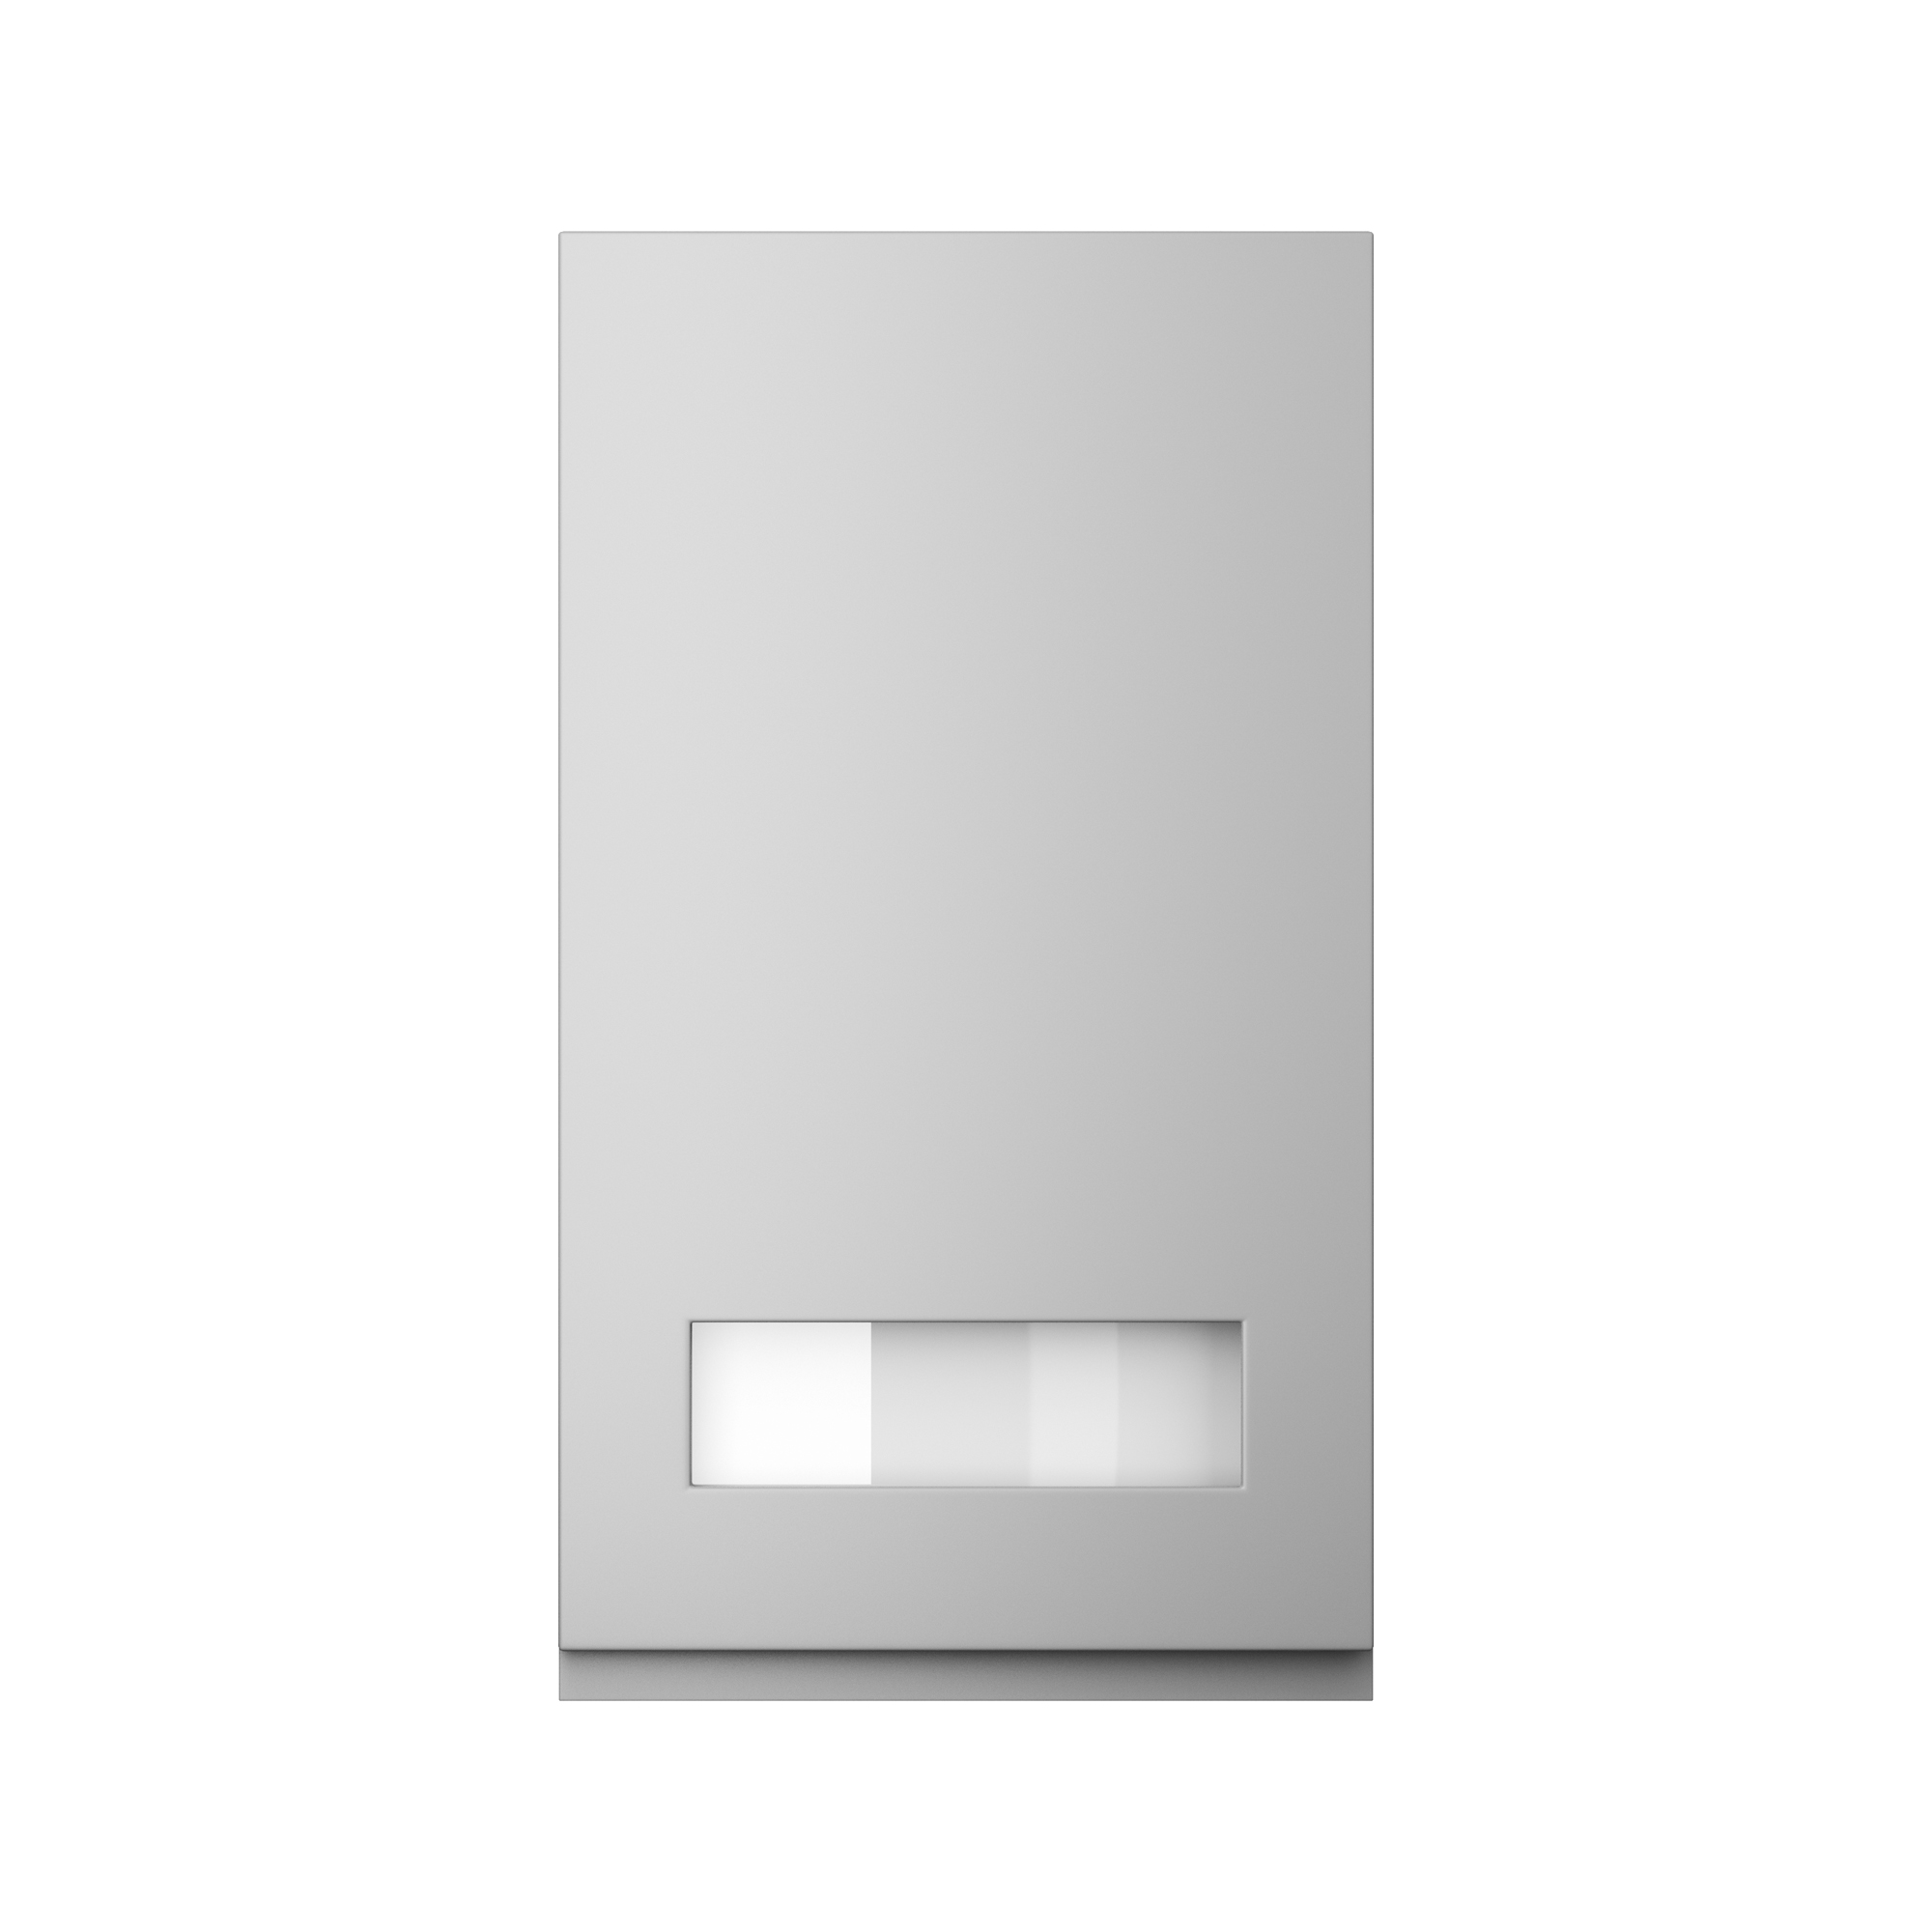 355 X 997 Letterbox Frame Includes Clear Glass - Strada Light Grey Gloss